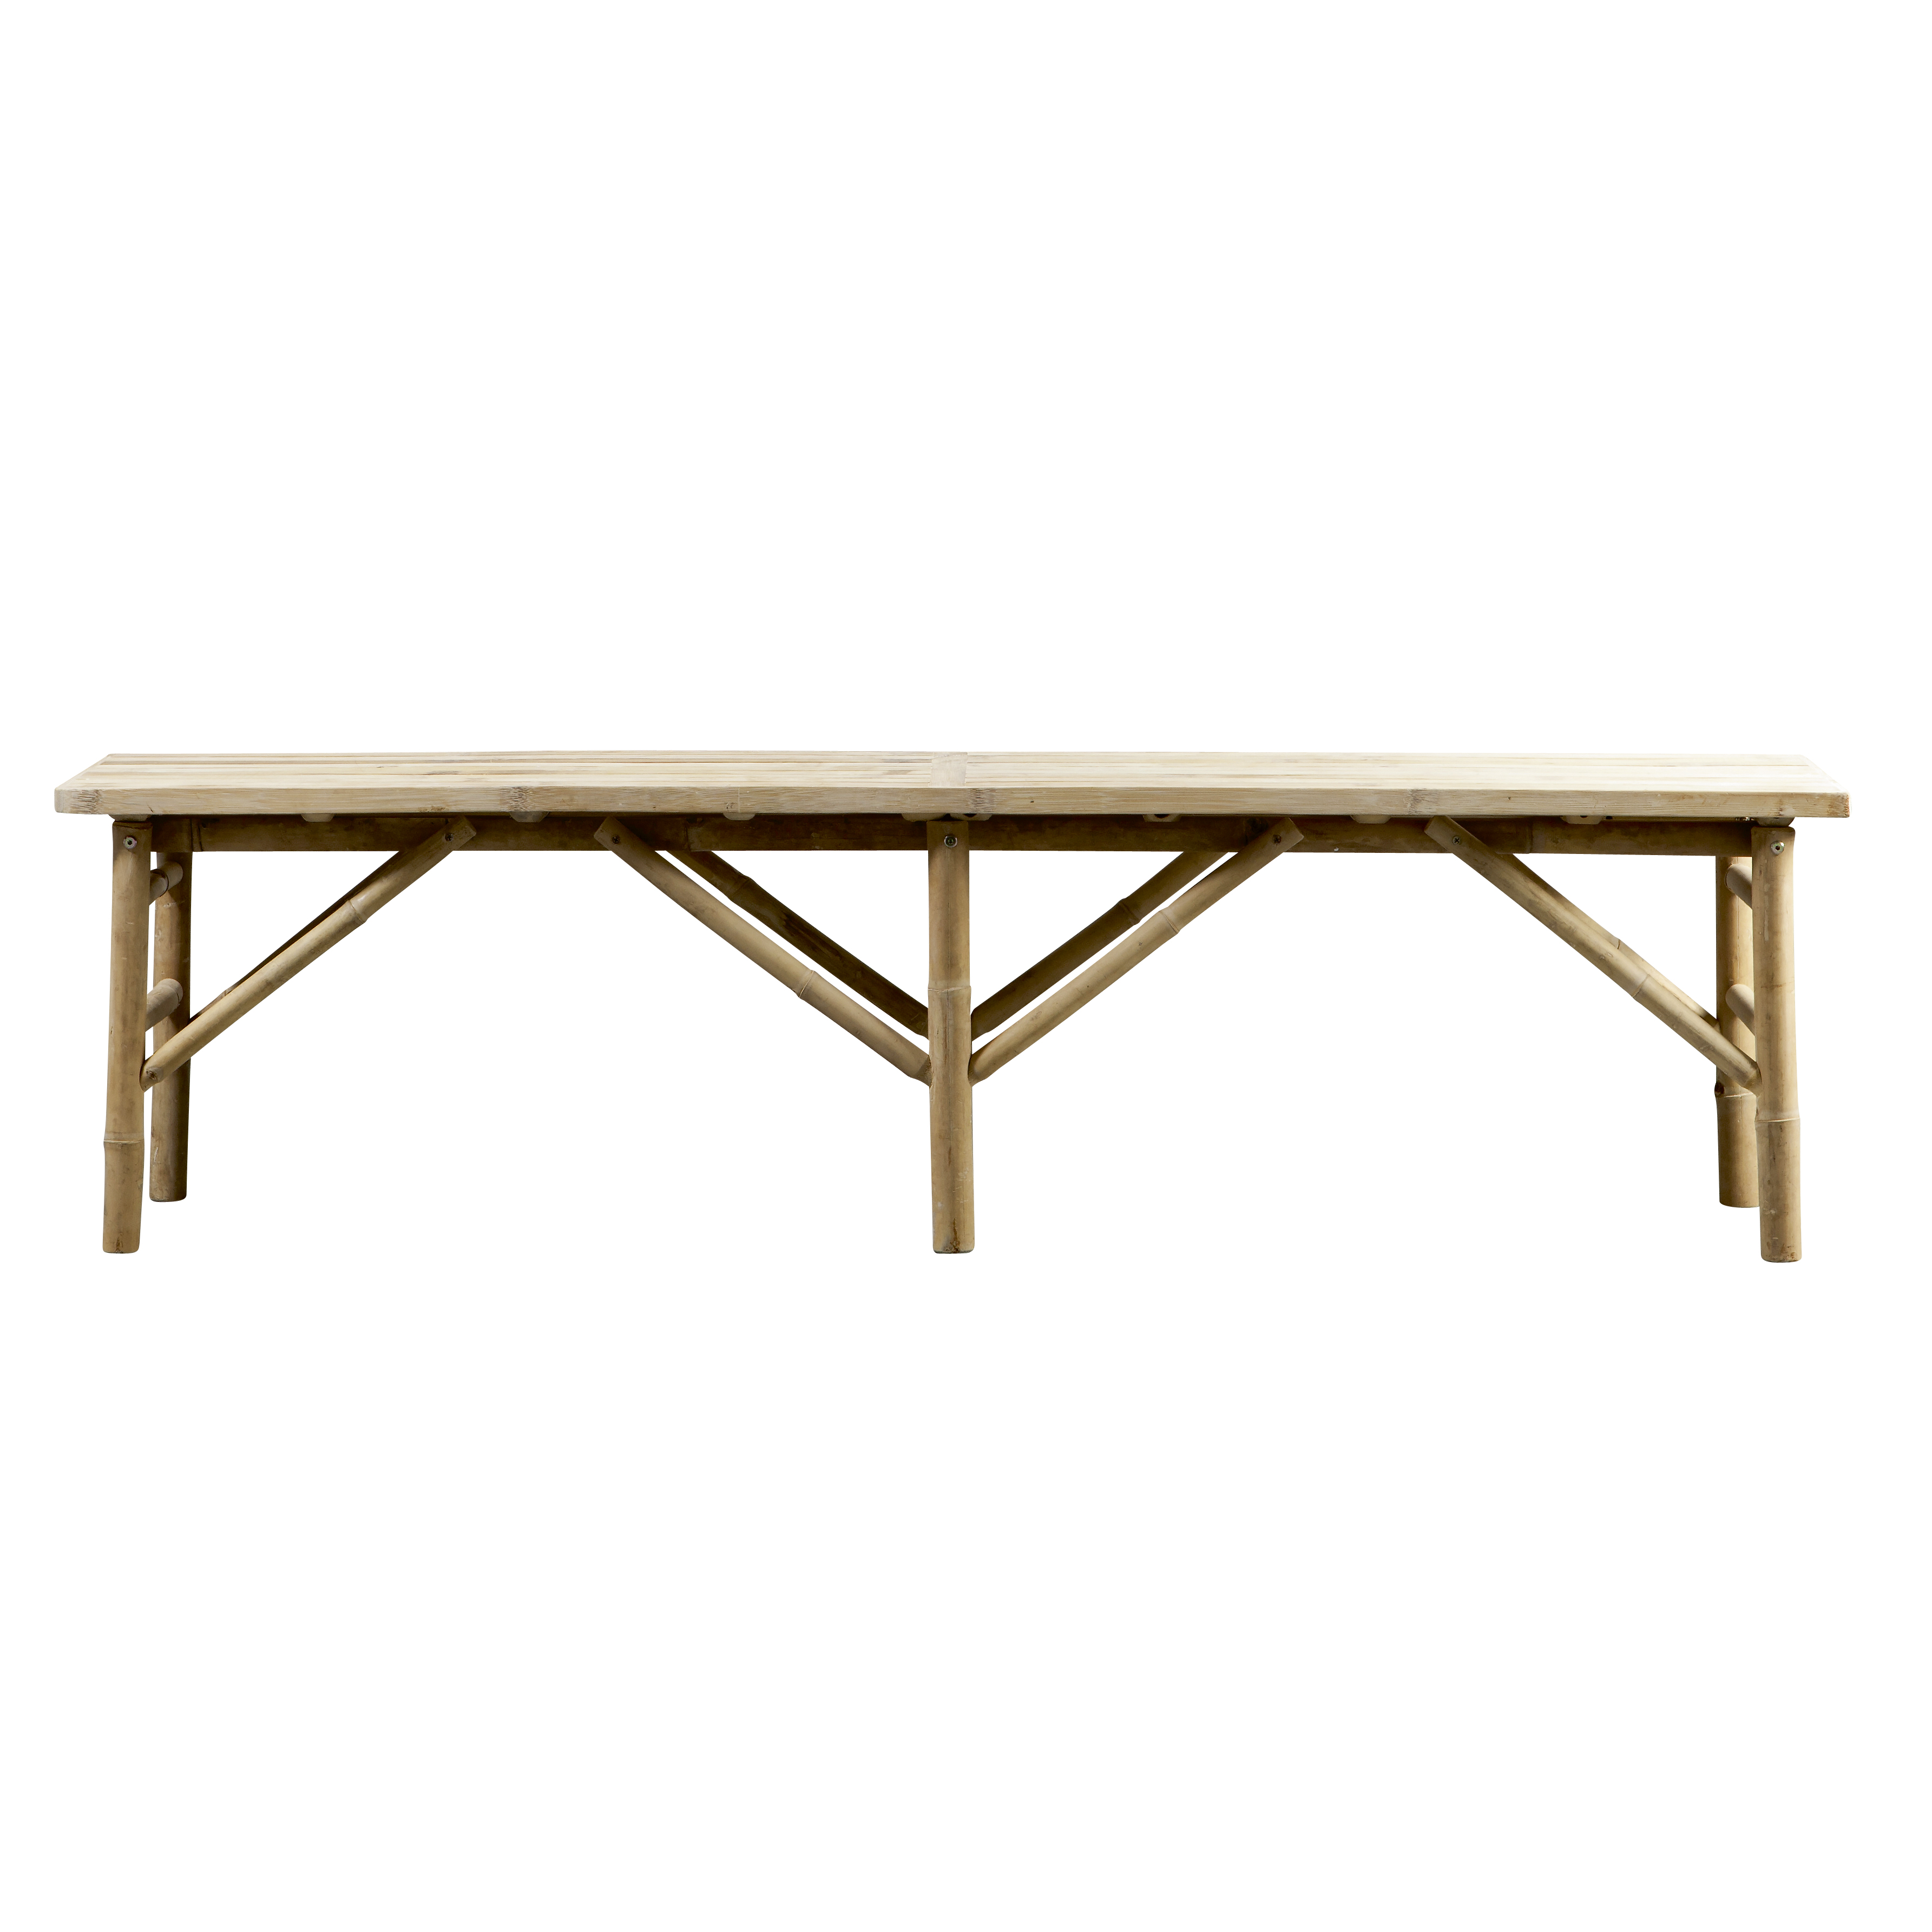 Bamboo Bench 170 X 35 X H 45 Cm Natural Products Tine K Home